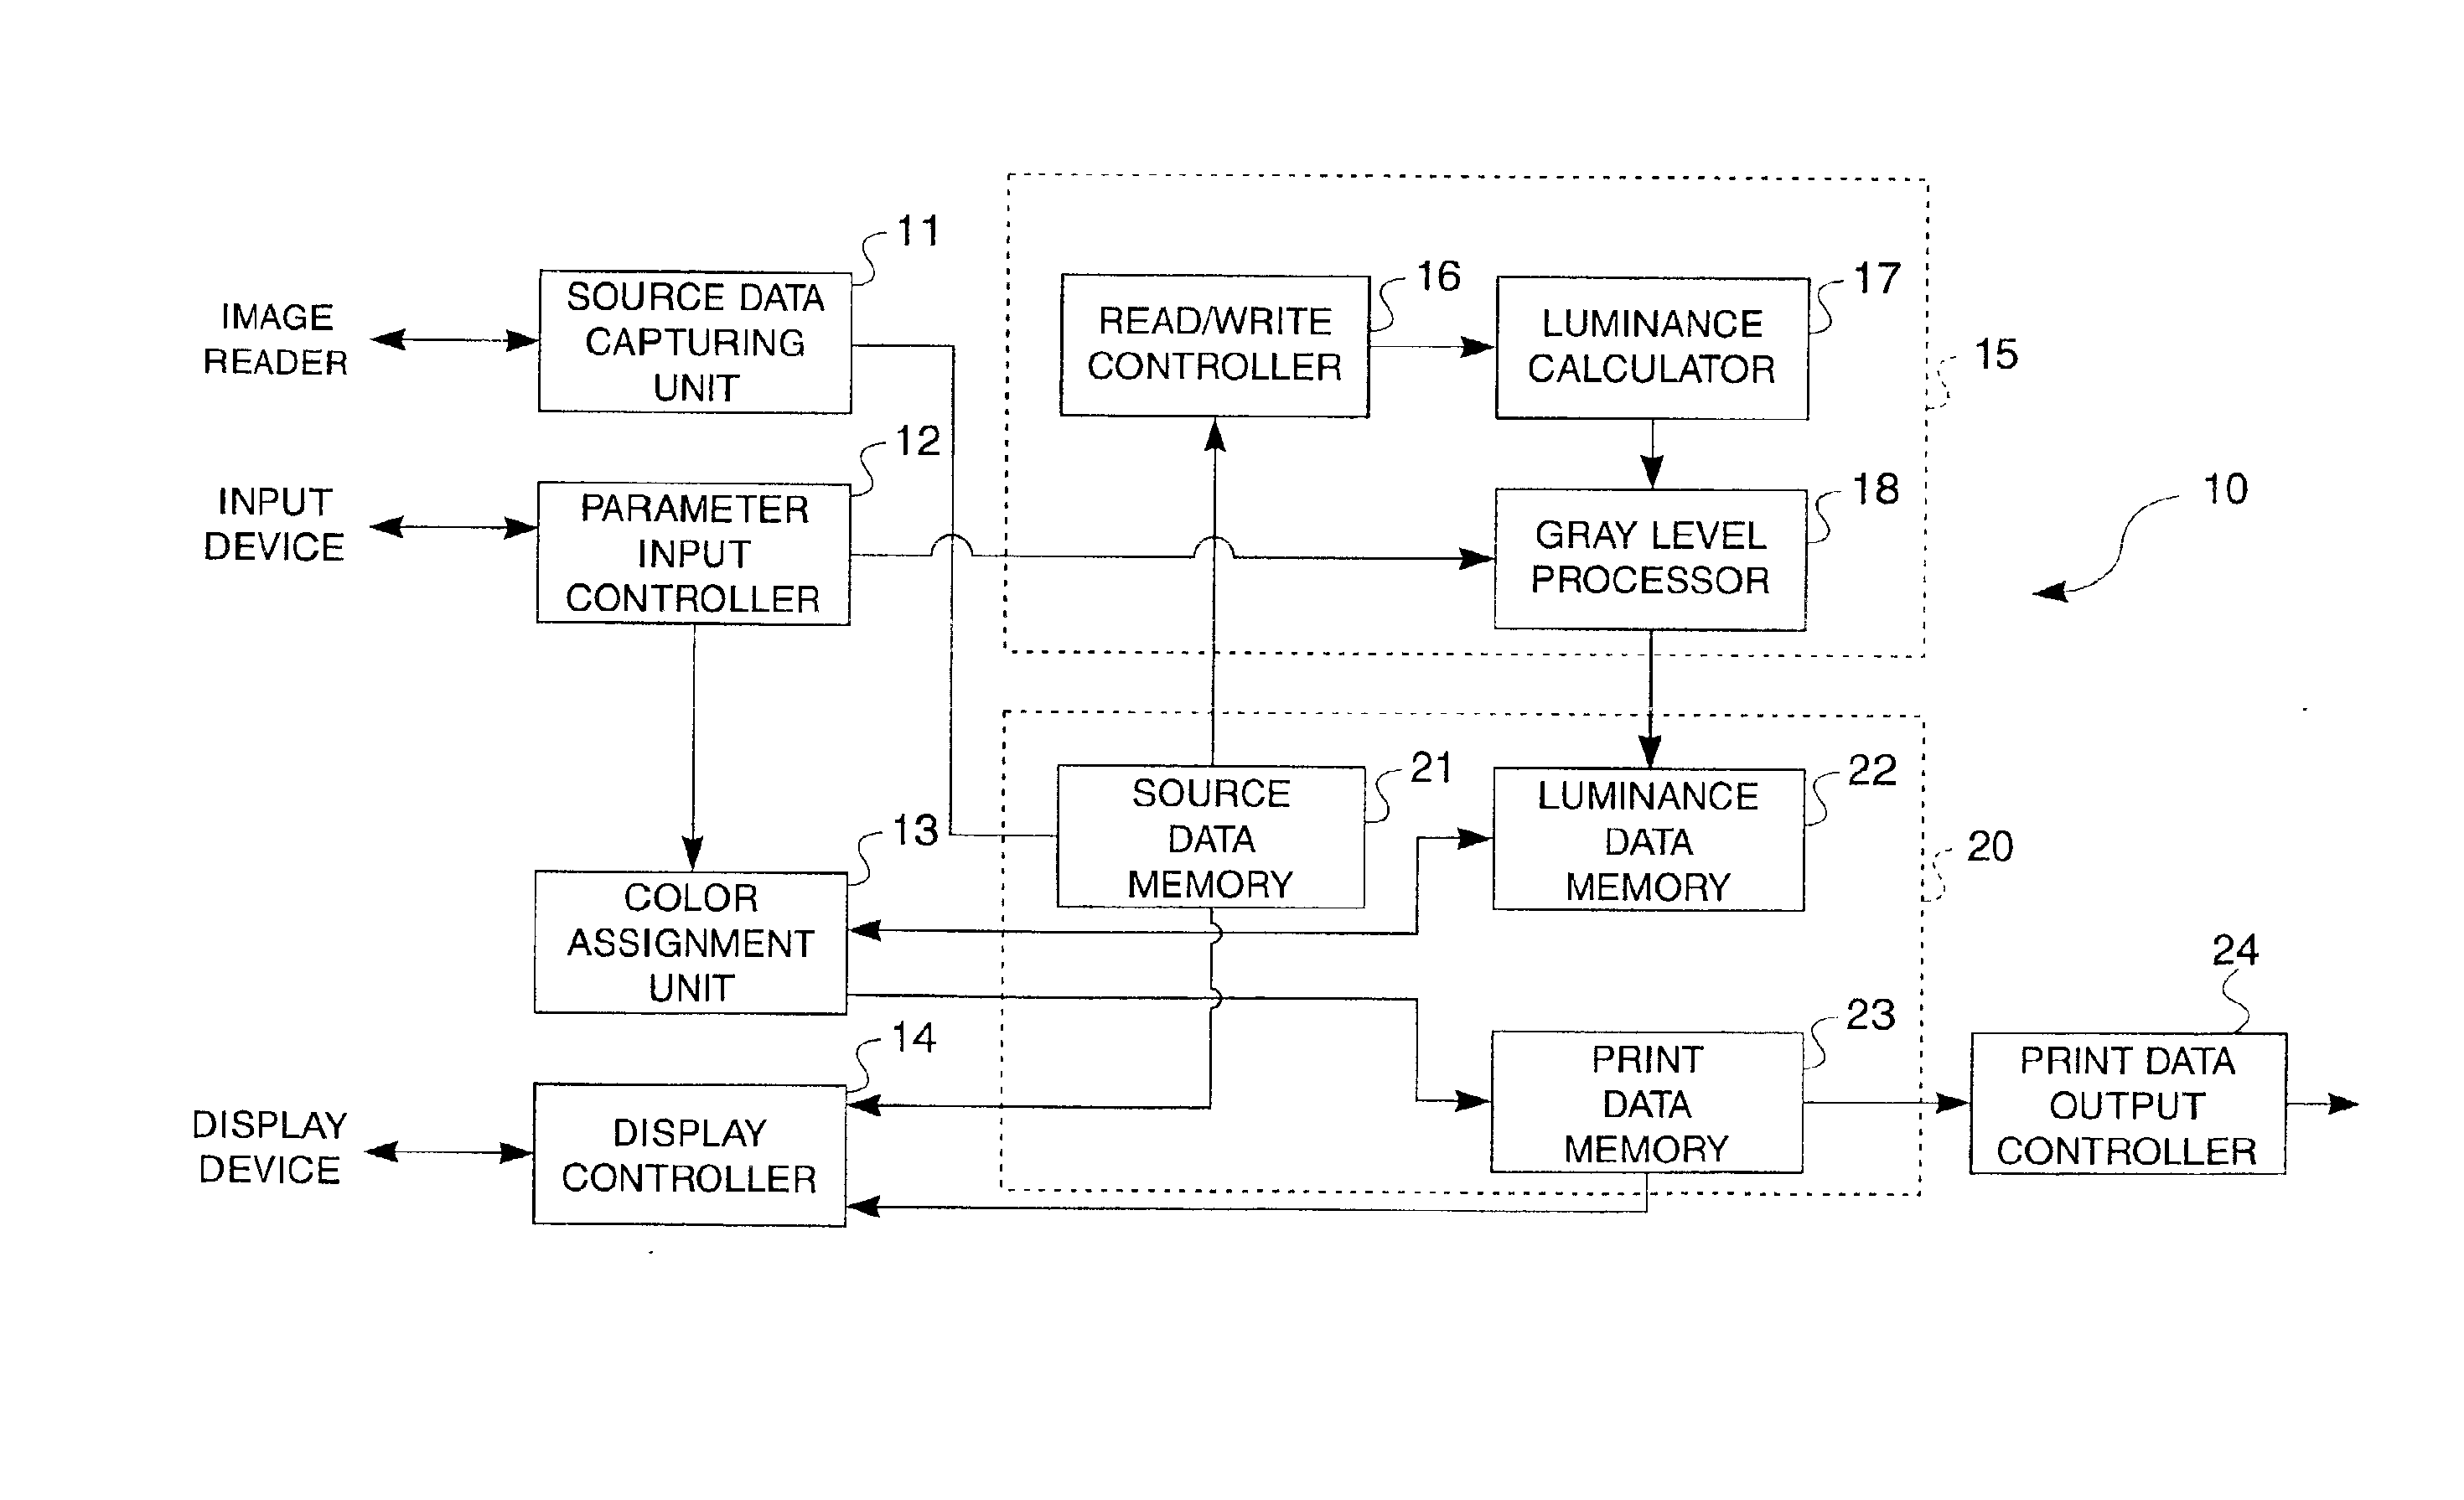 System, method and computer program converting pixels to luminance levels and assigning colors associated with luminance levels in printer or display output devices